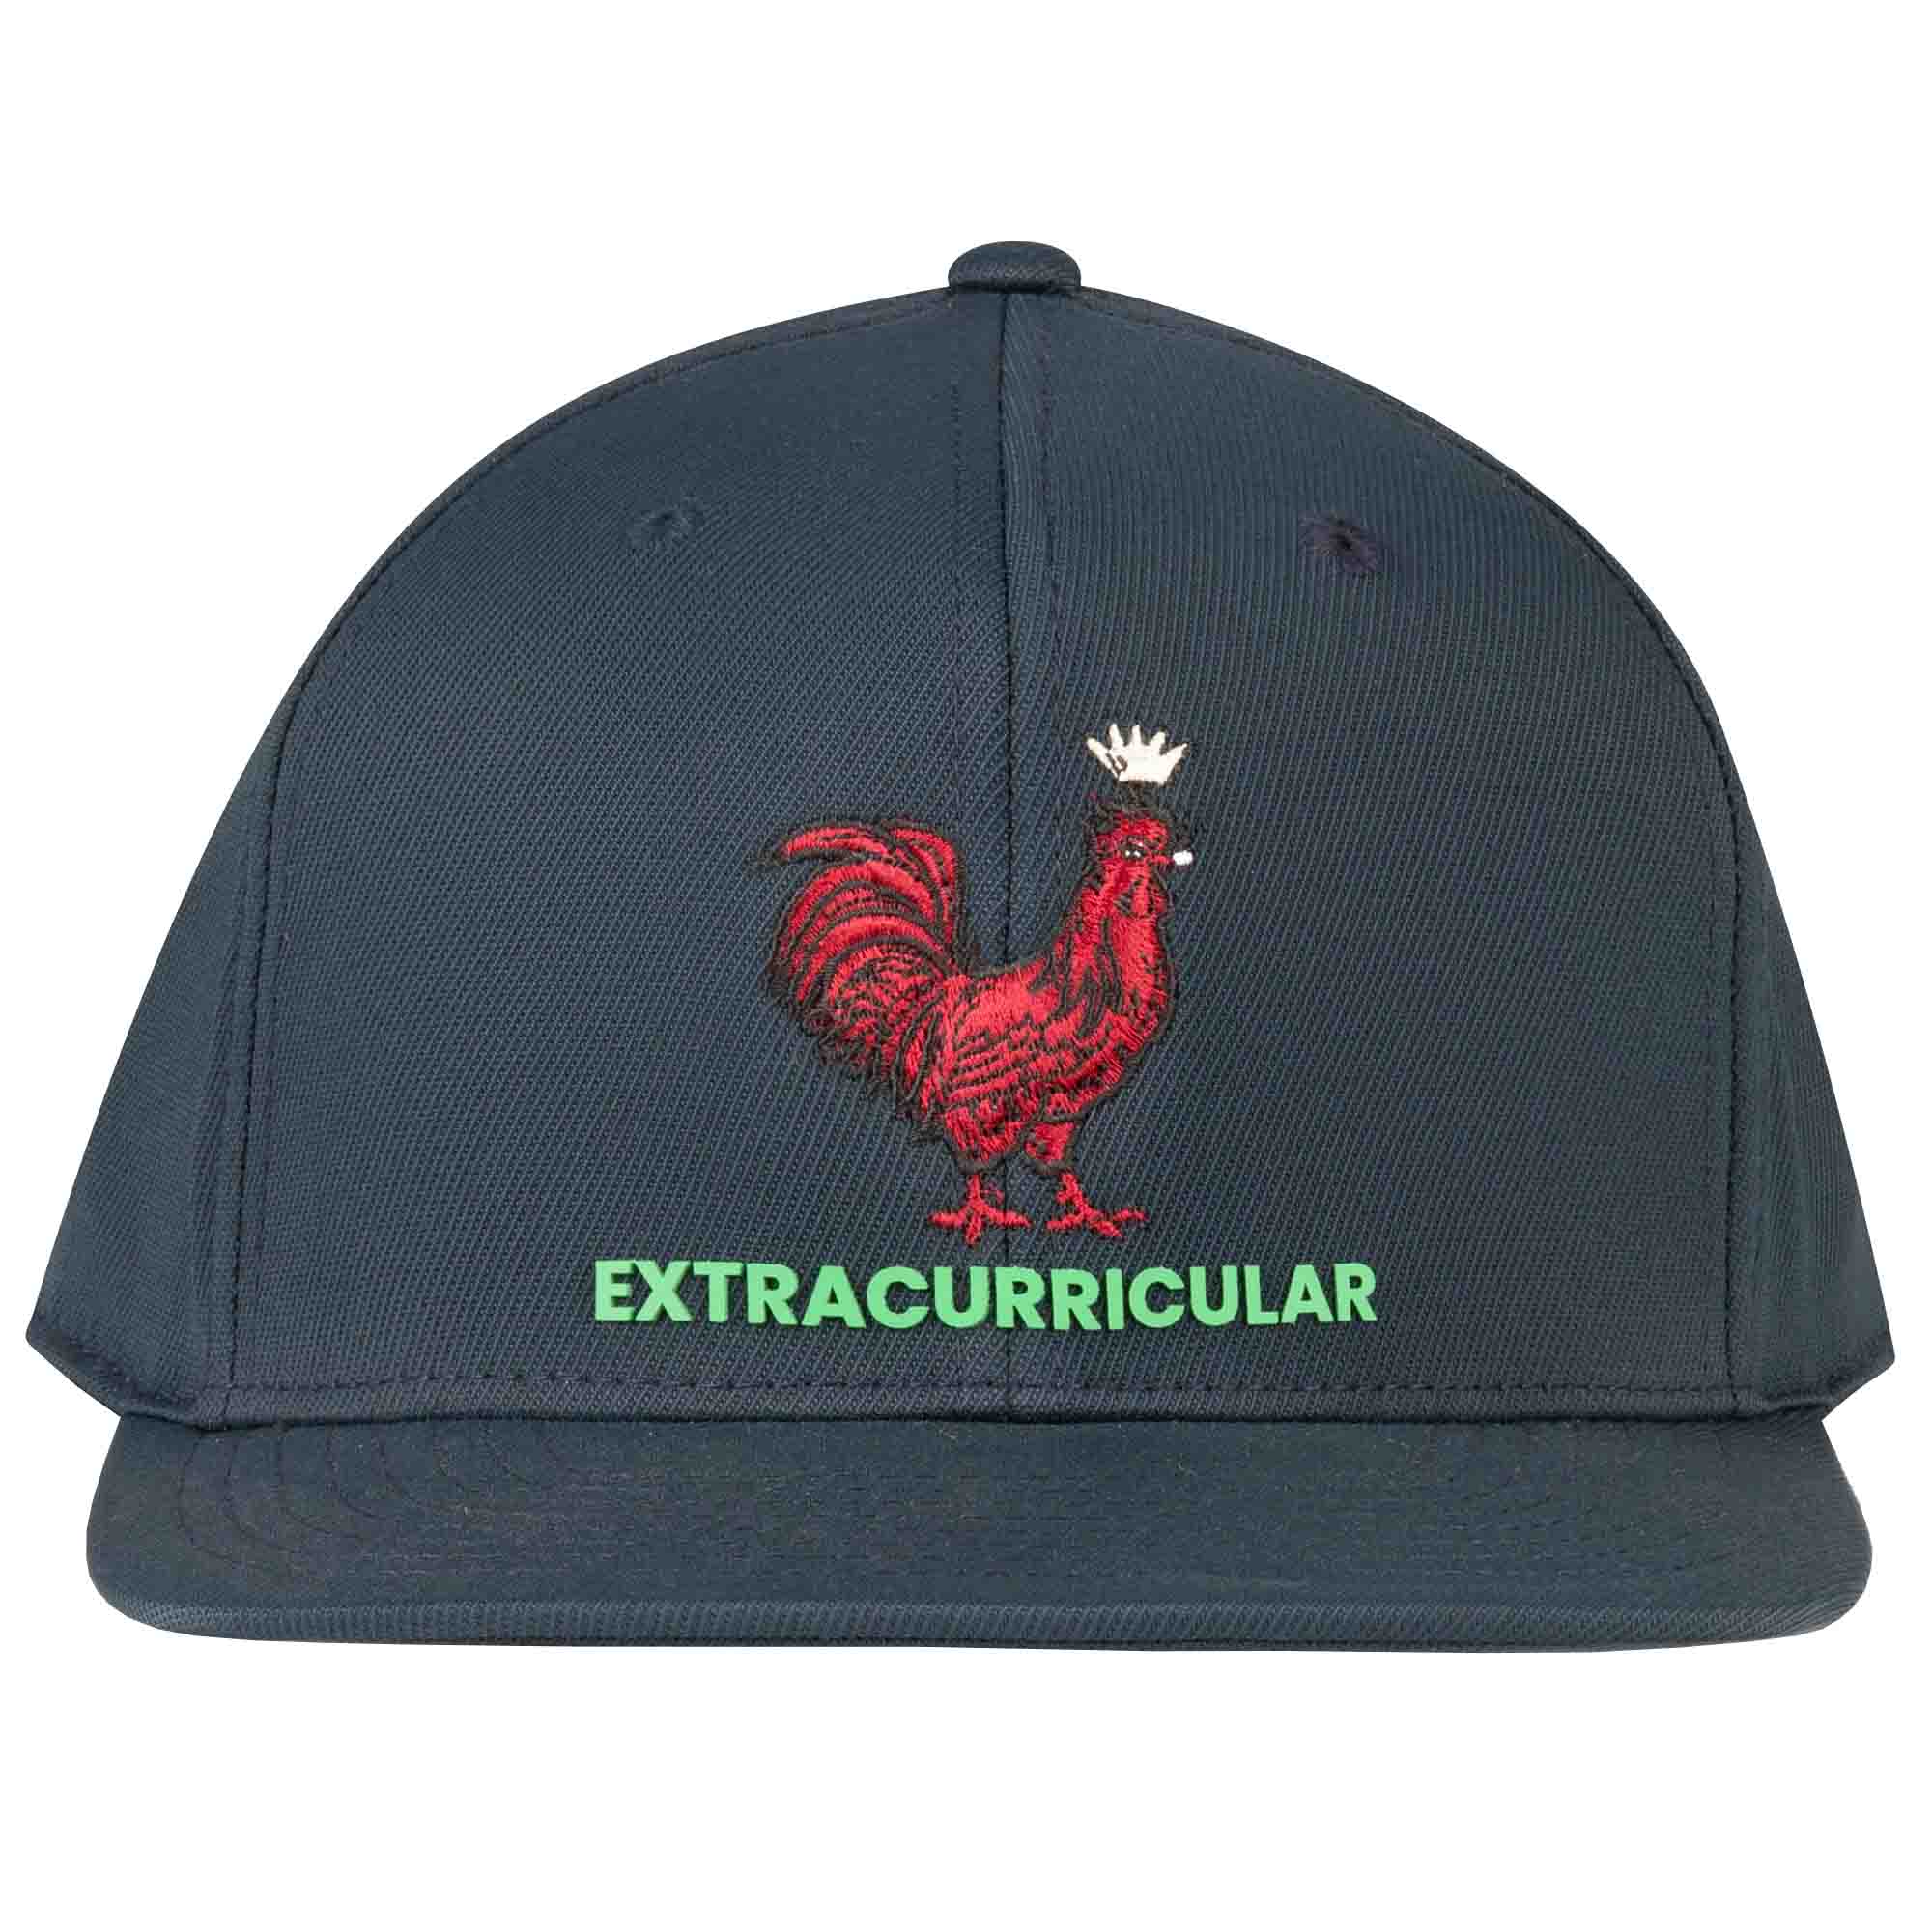 KING ROOSTER HAT